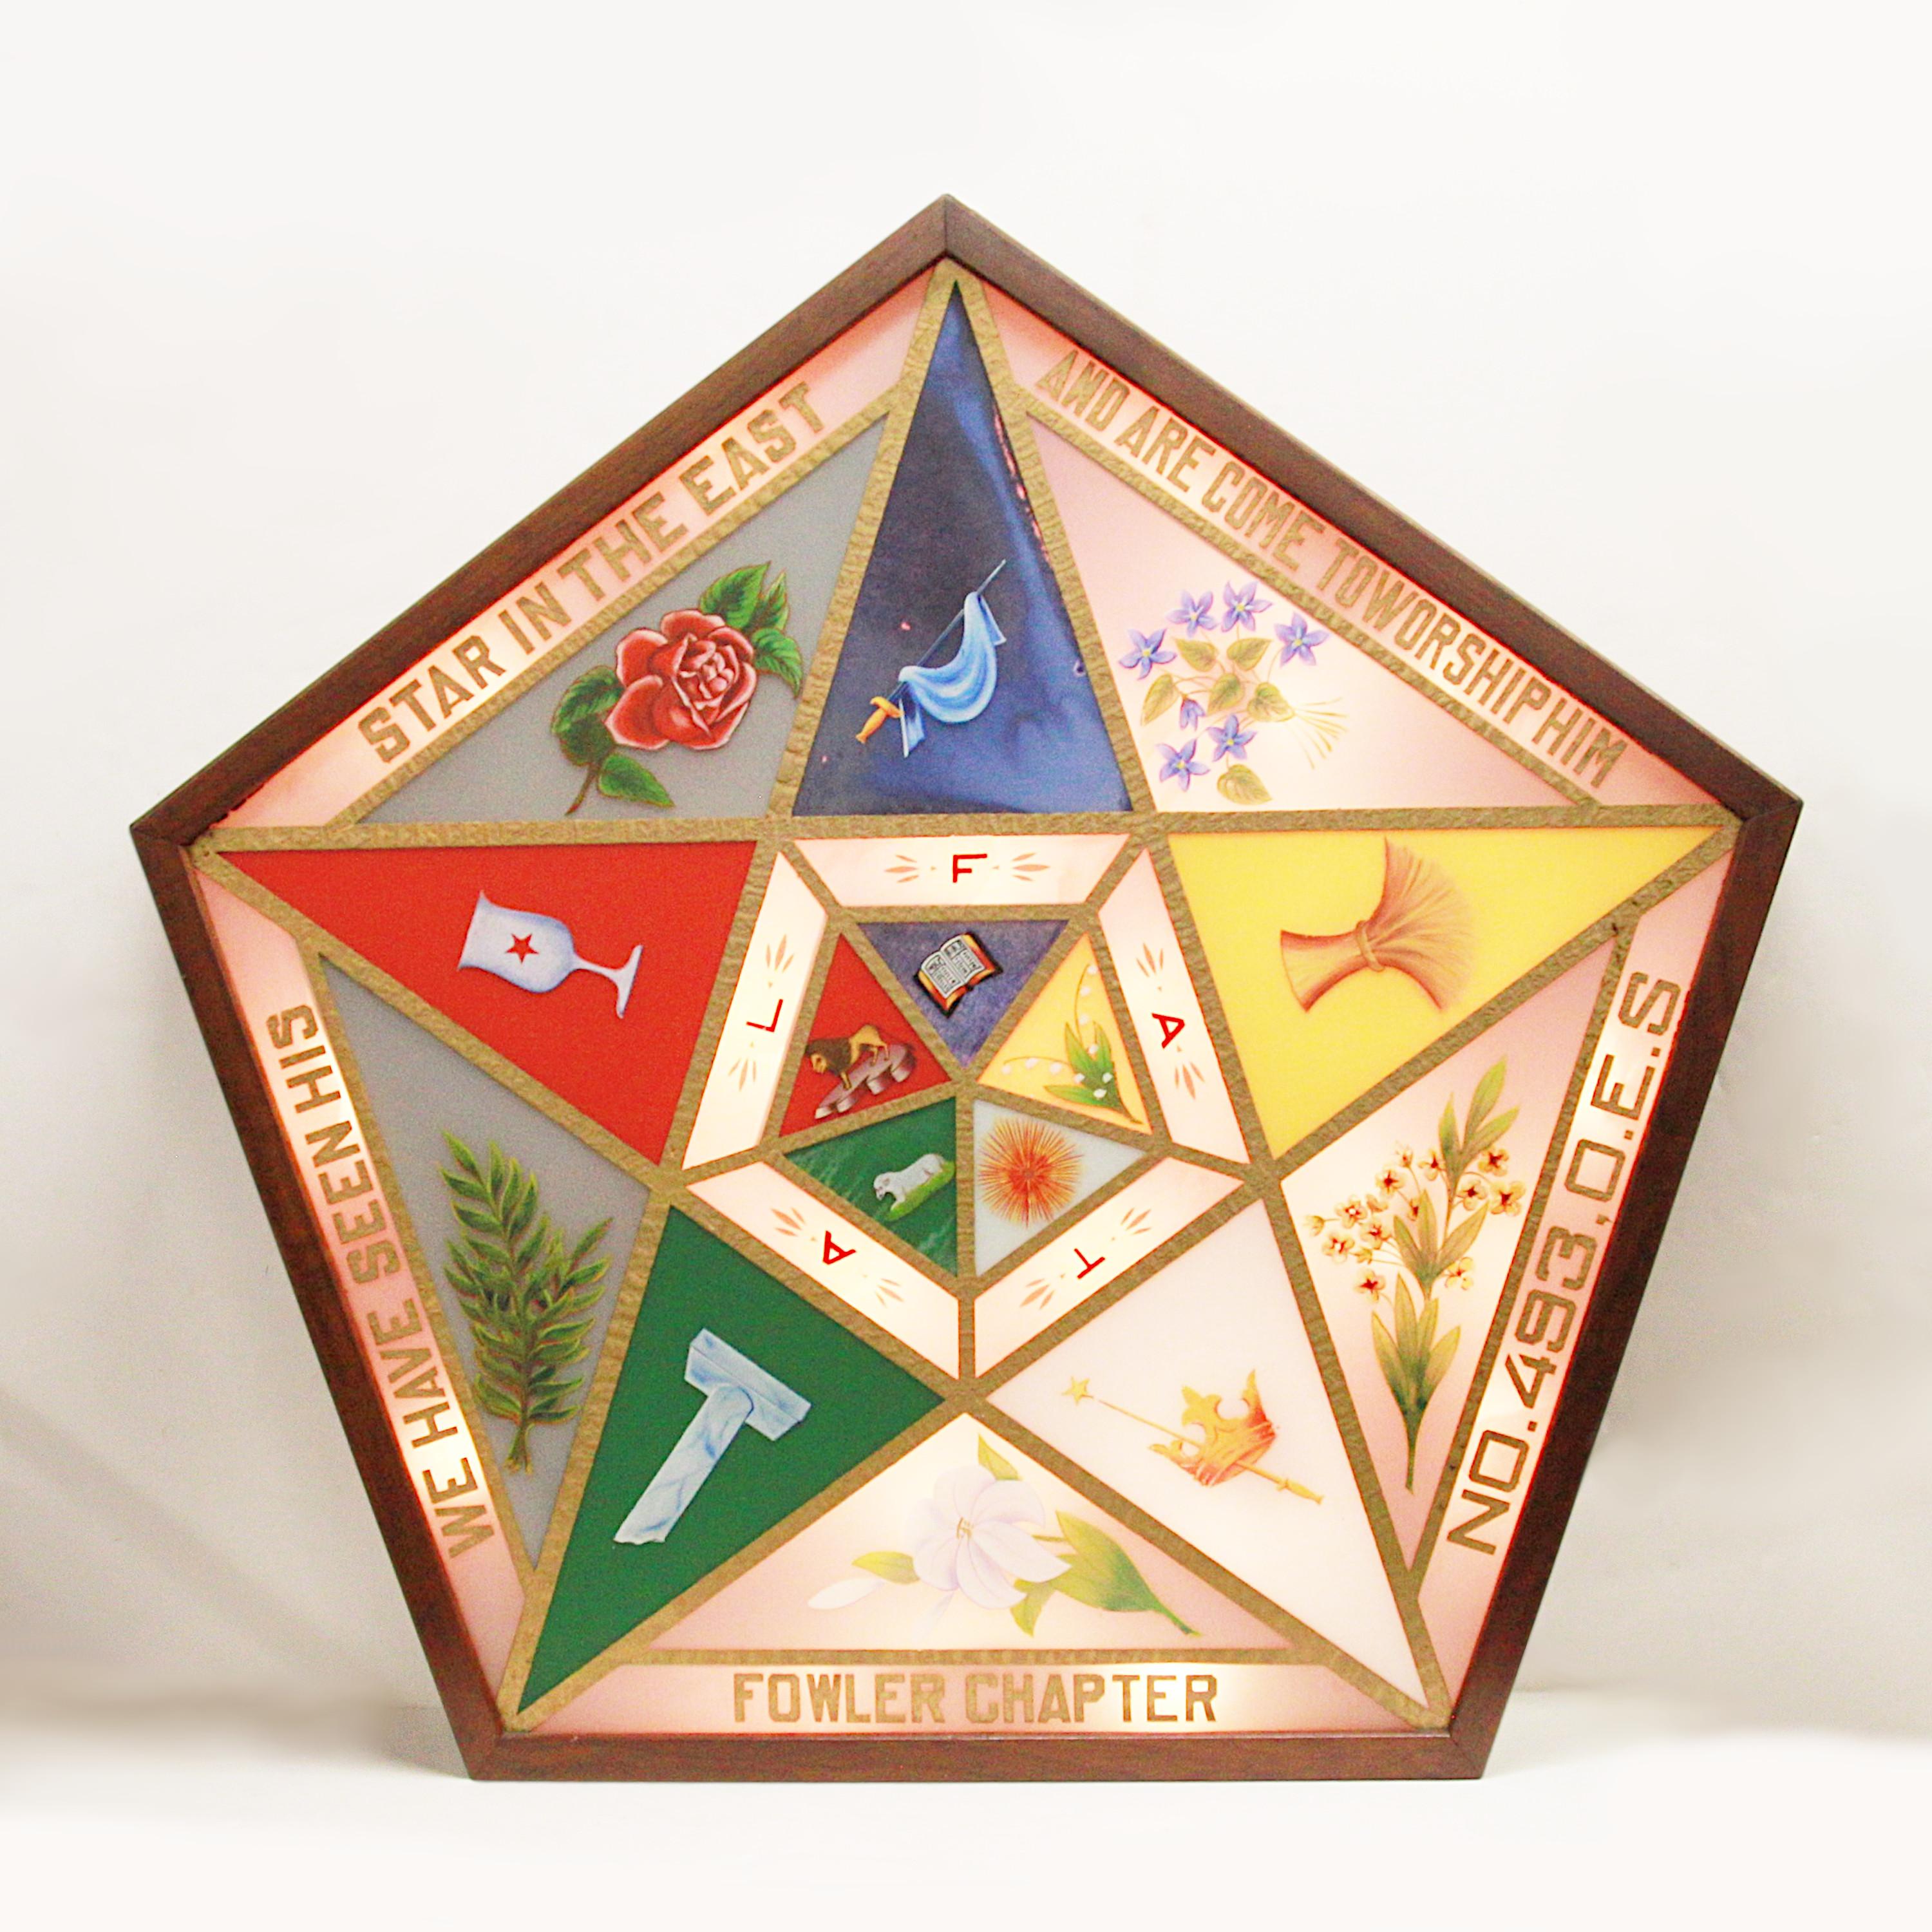 Rare Vintage 1930s Order of the Eastern Star Light-Up Masonic Lodge Signet Sign In Good Condition For Sale In Lafayette, IN